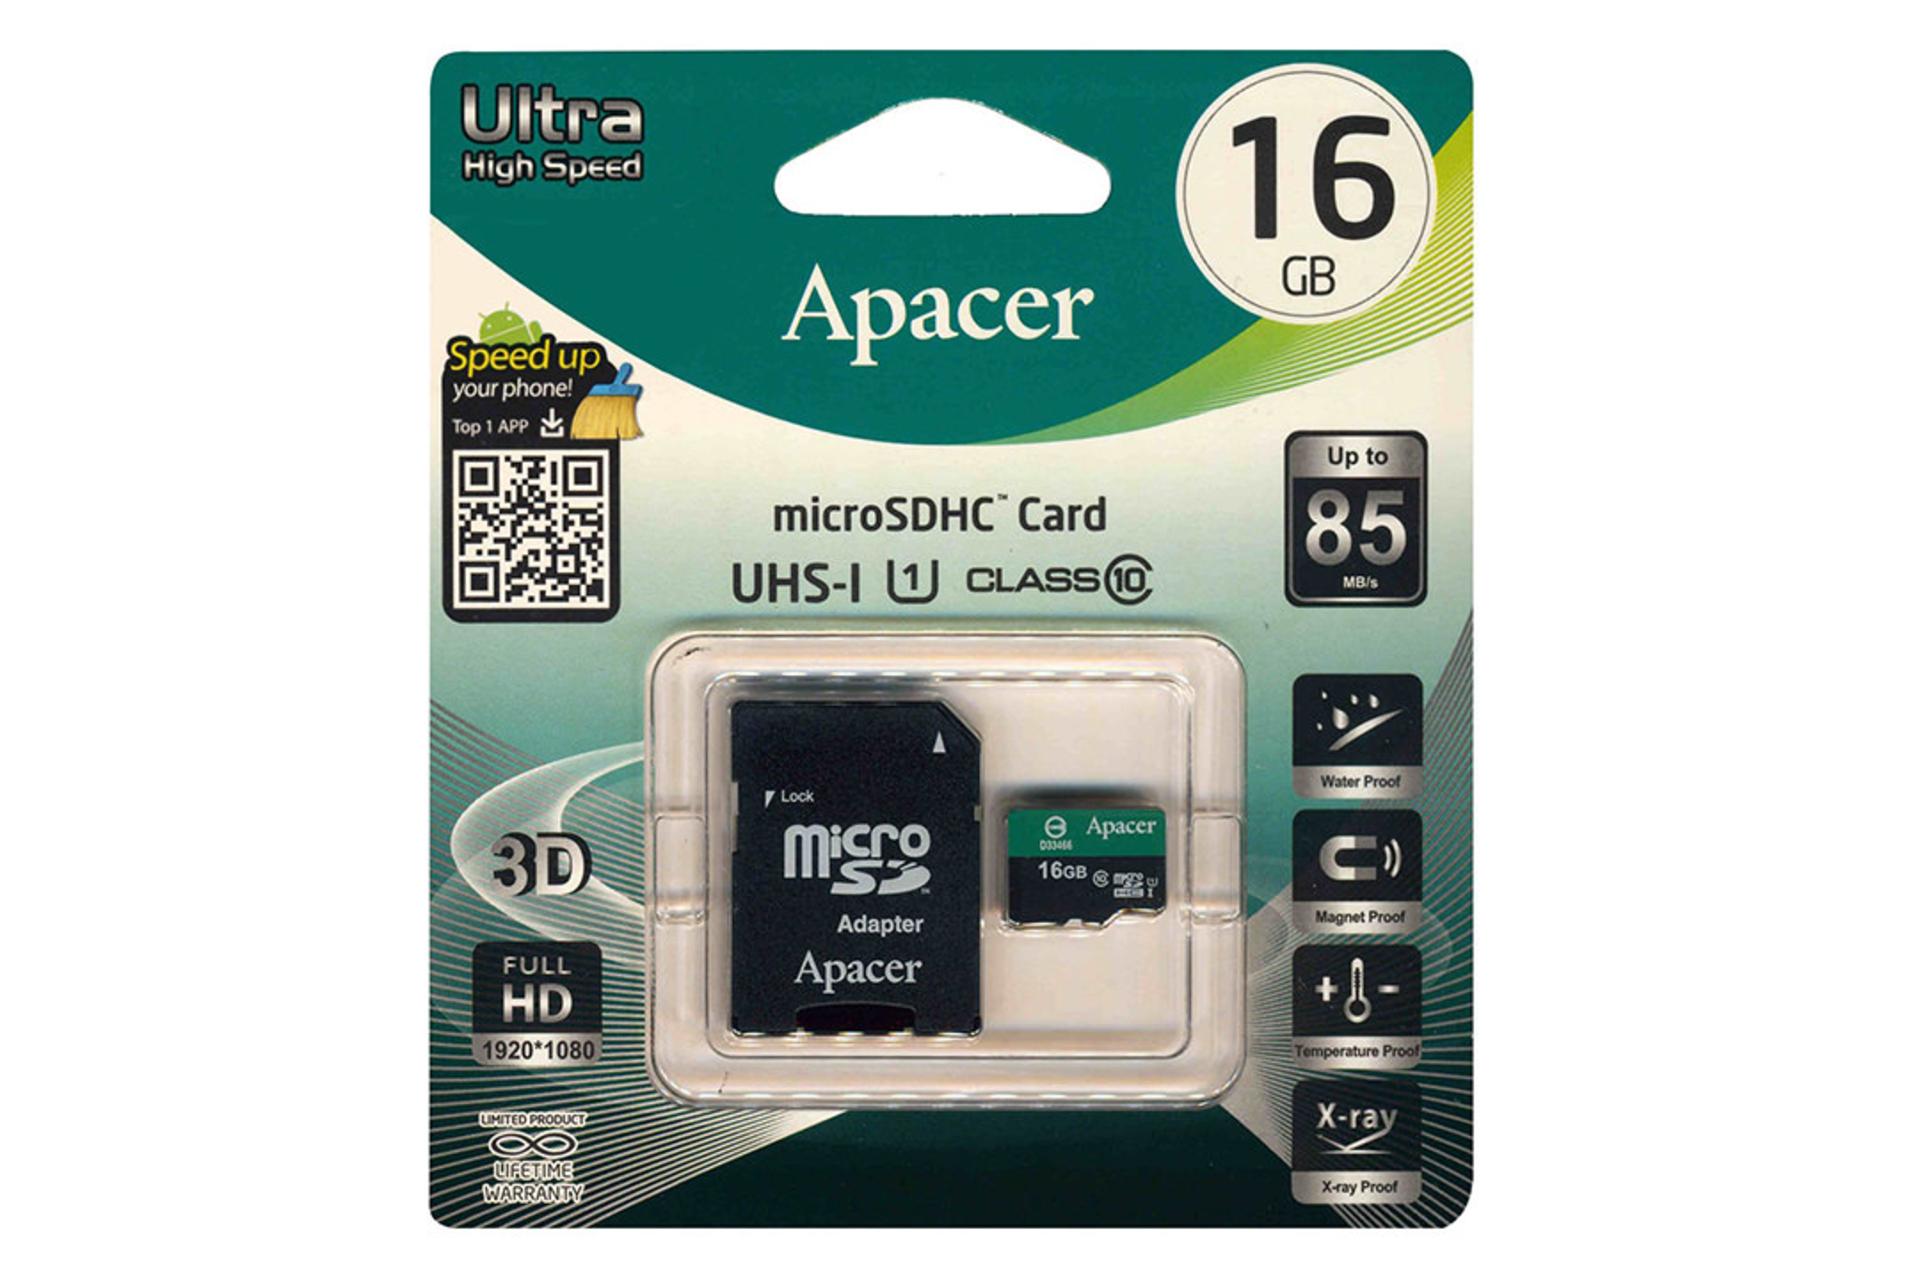 Apacer Color Ultra High Speed microSDHC Class 10 UHS-I U1 16GB